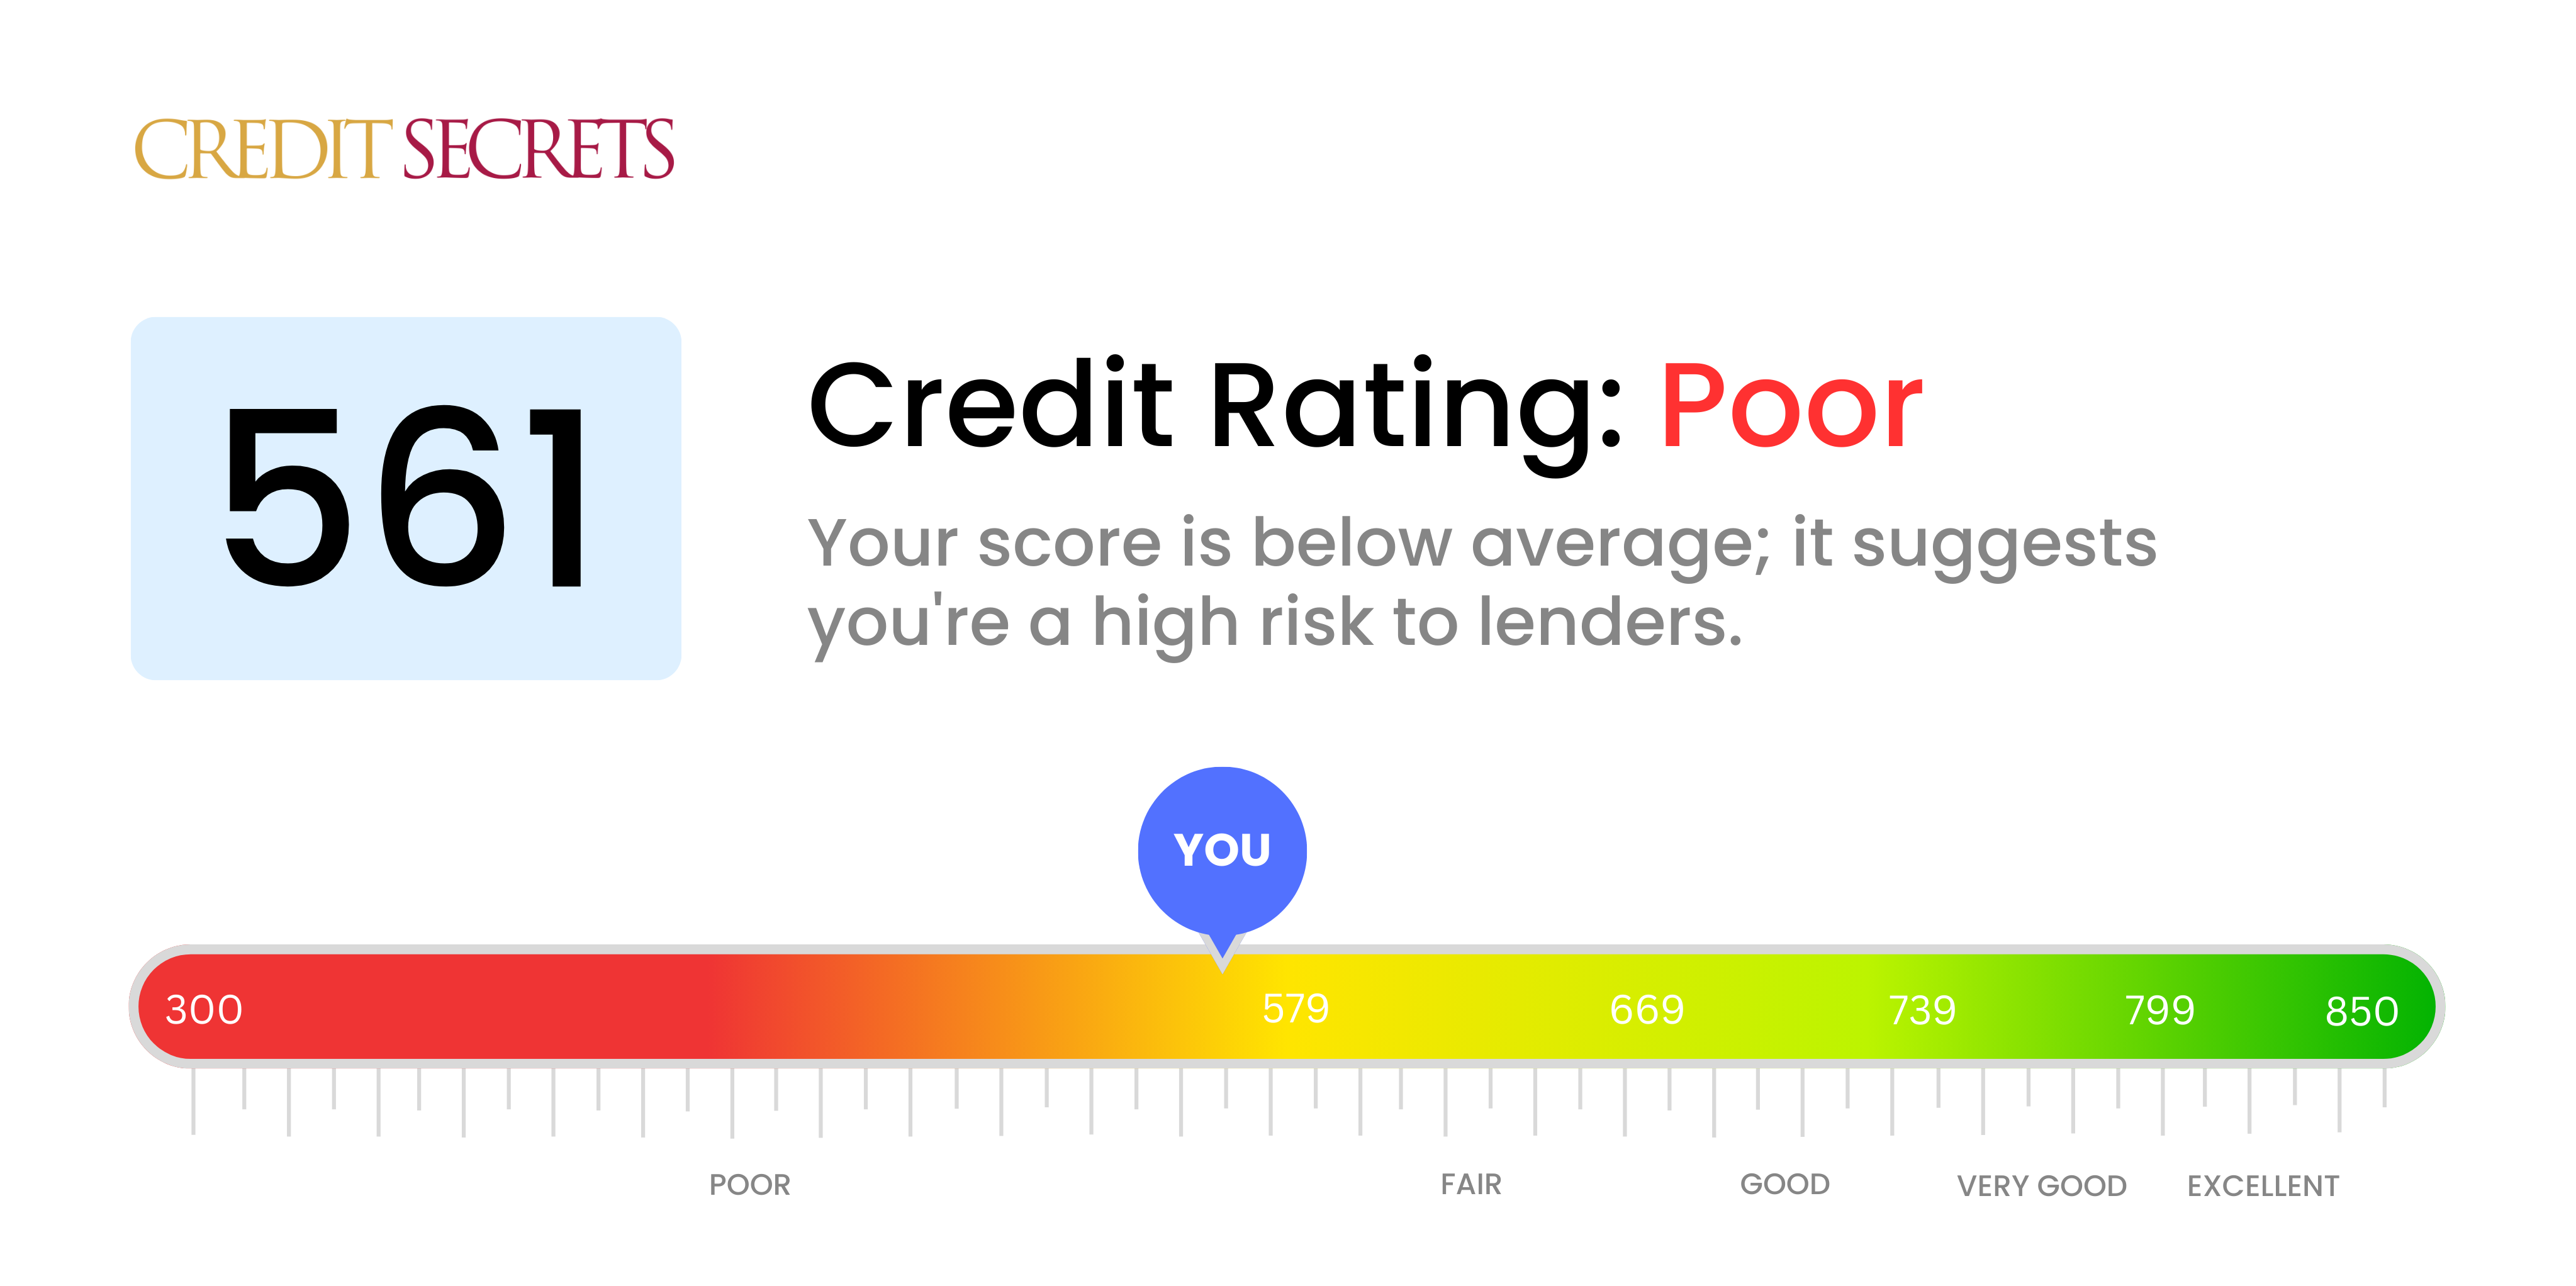 Is 561 a good credit score?